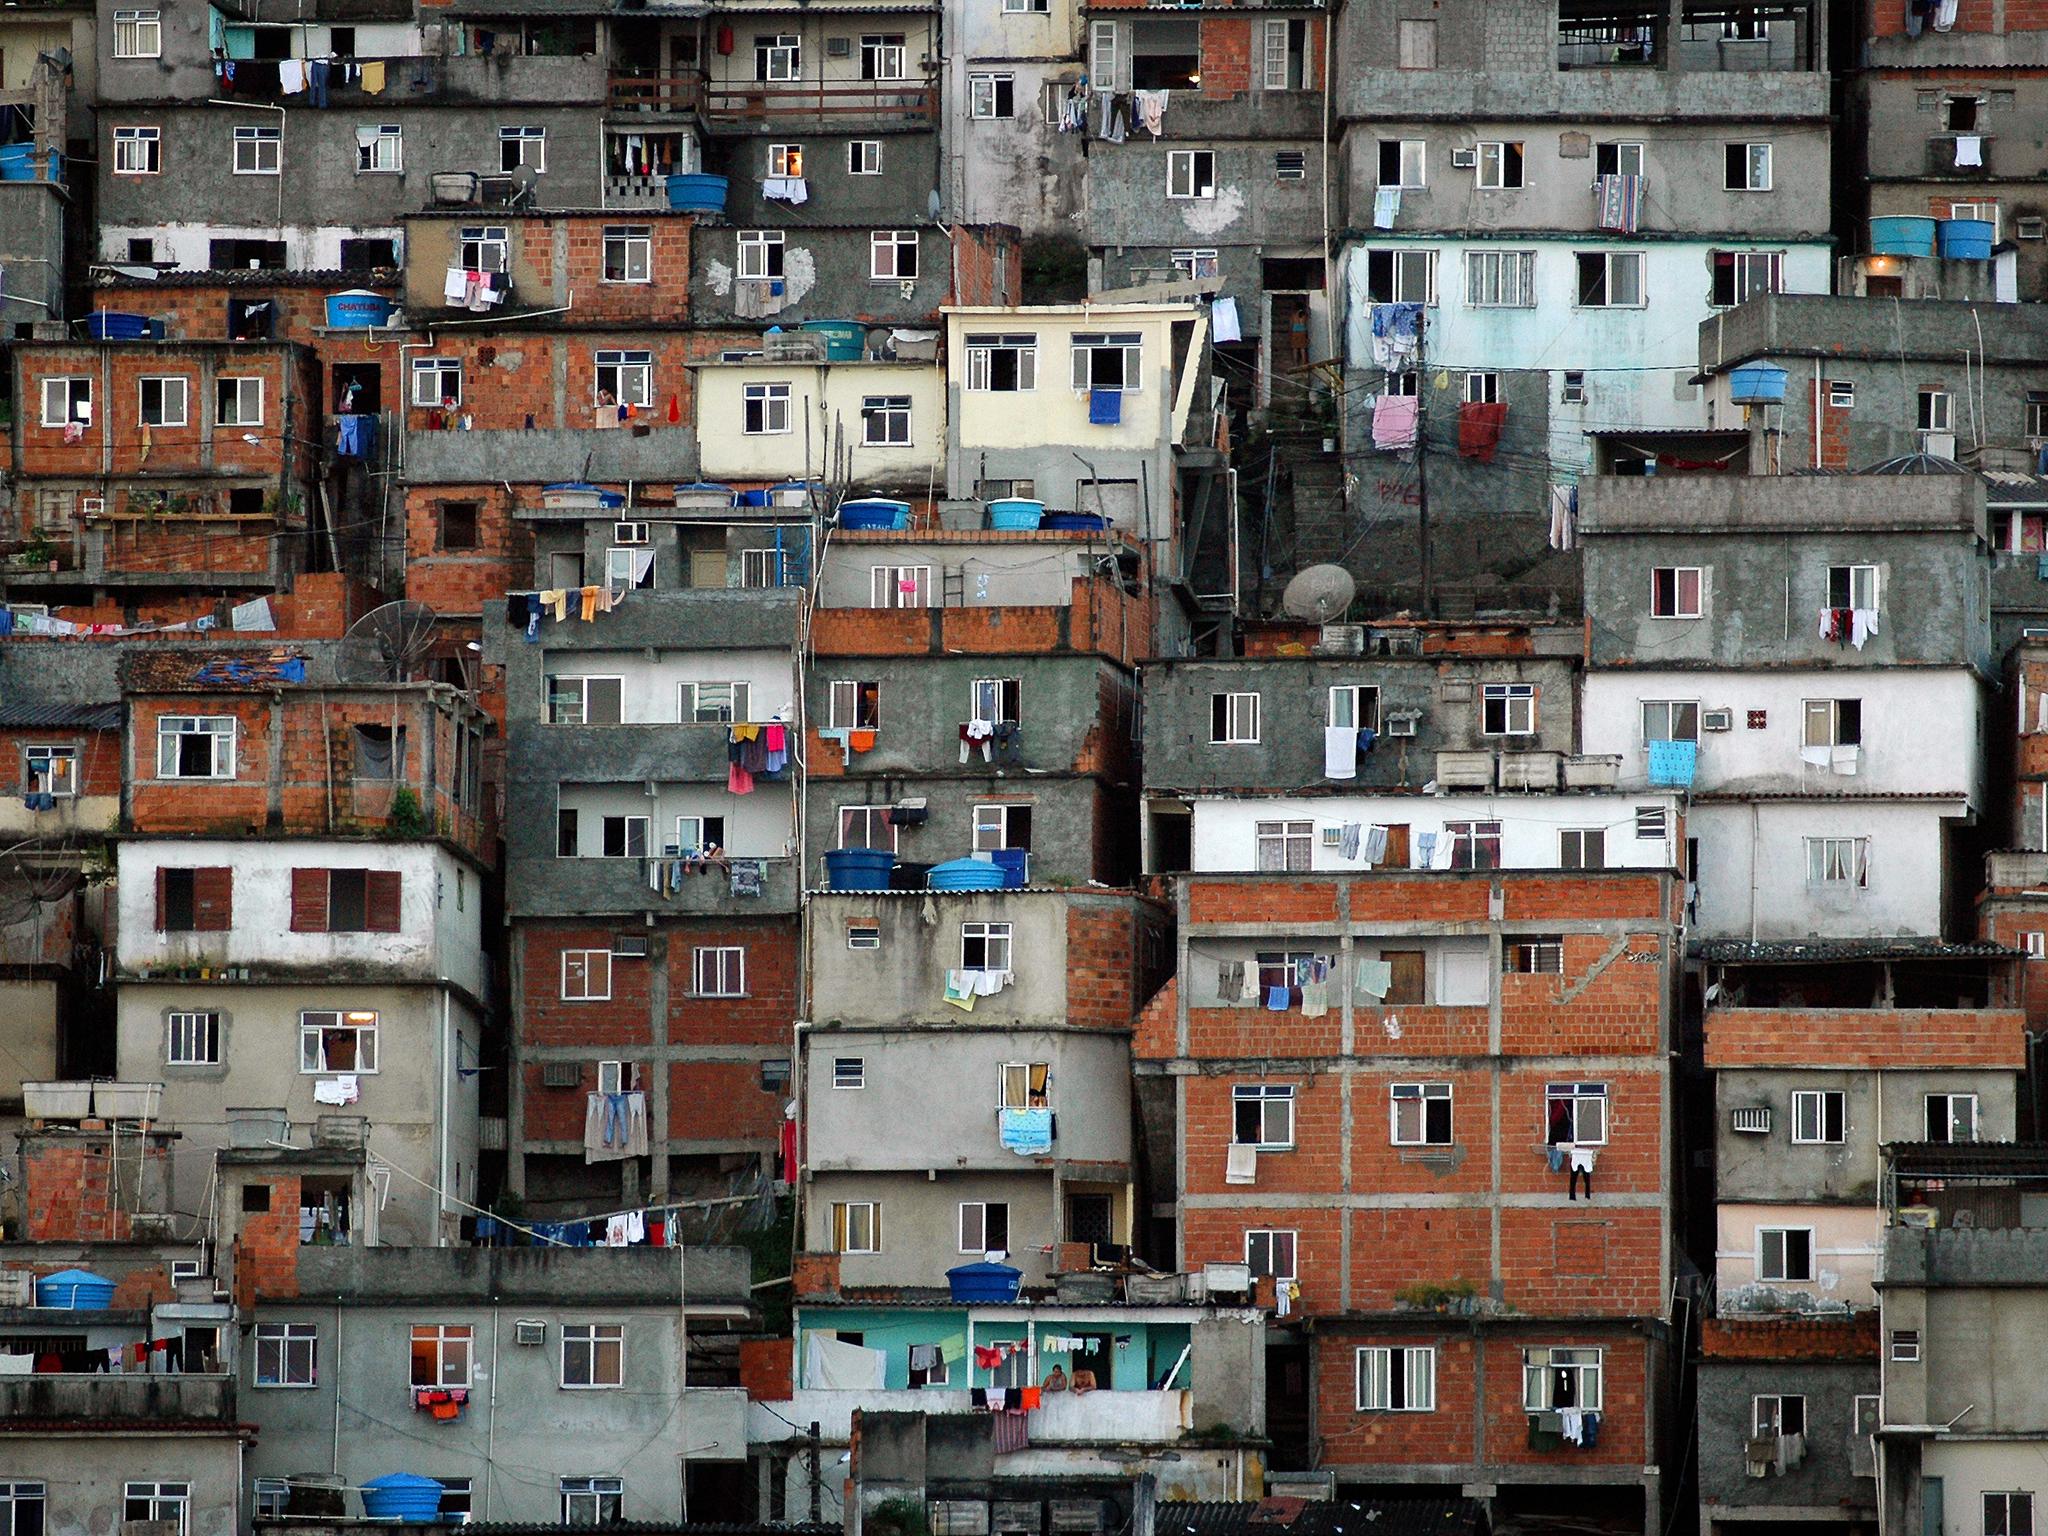 Favela Morro dos Cabritos: these crowded houses climb mountain act as backdrop inlands from Copacabana